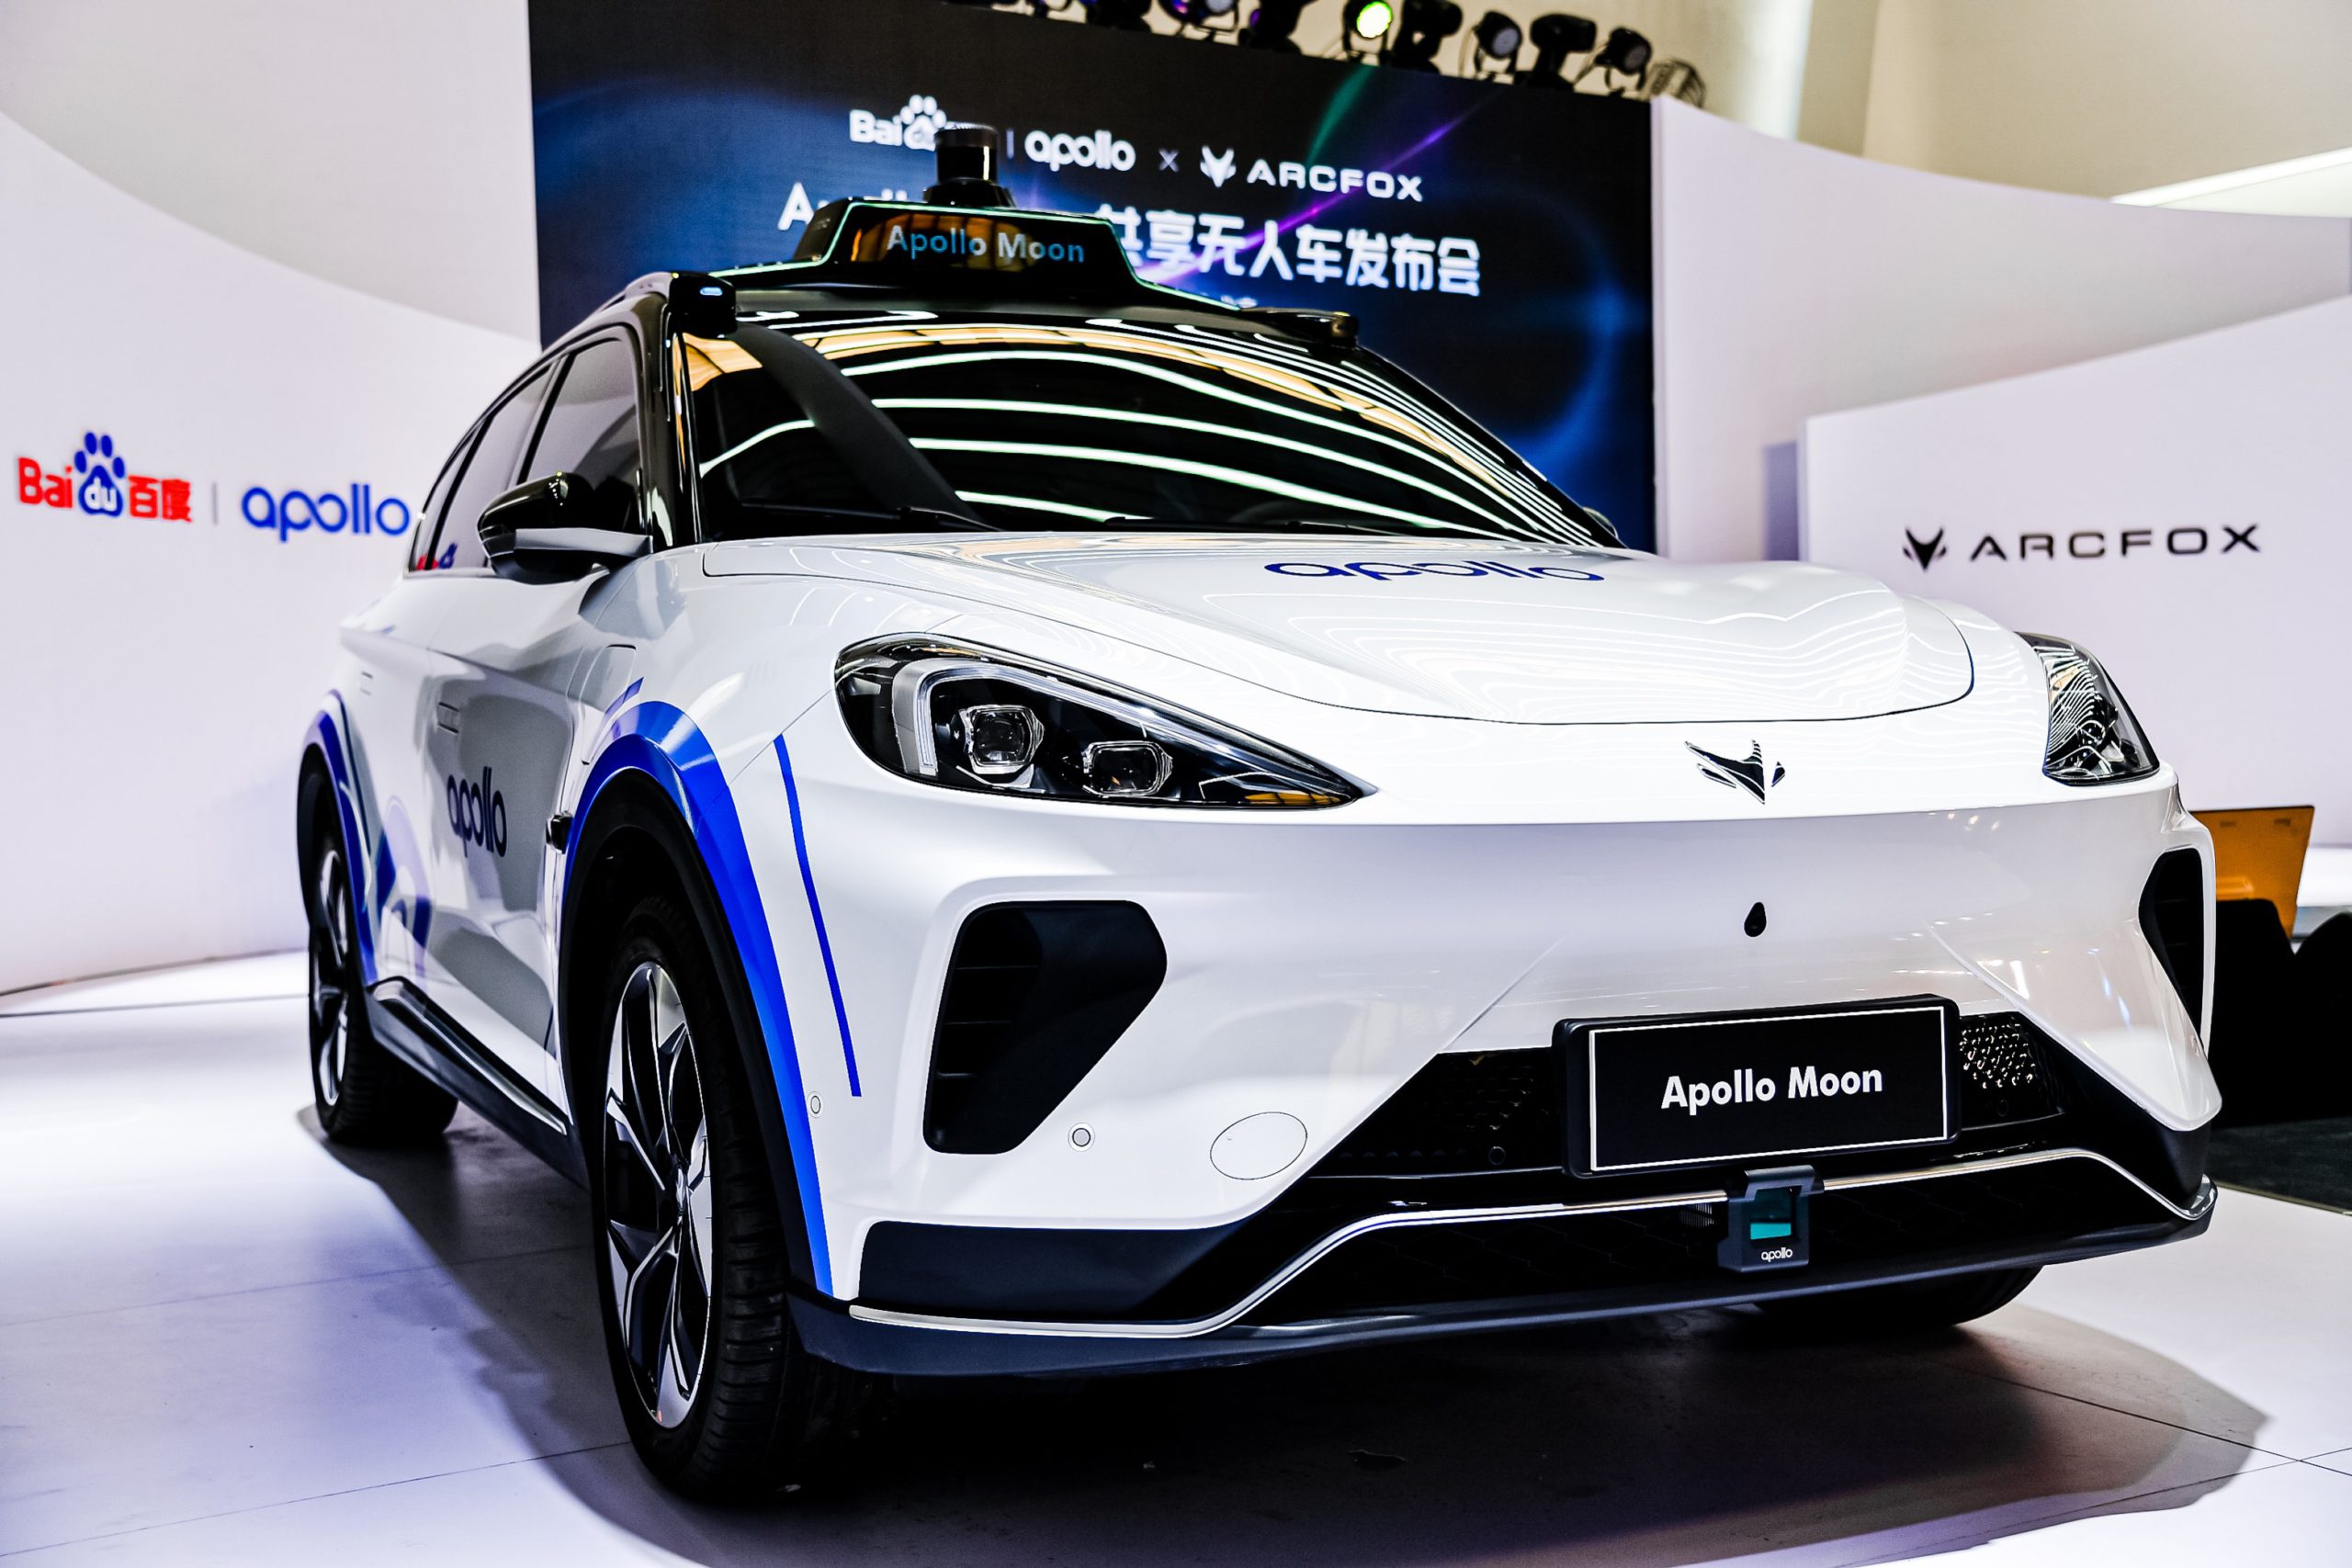 Baidu Apollo and Arcfox team up for robotaxi vehicle inspired by ‘Moon’ landings